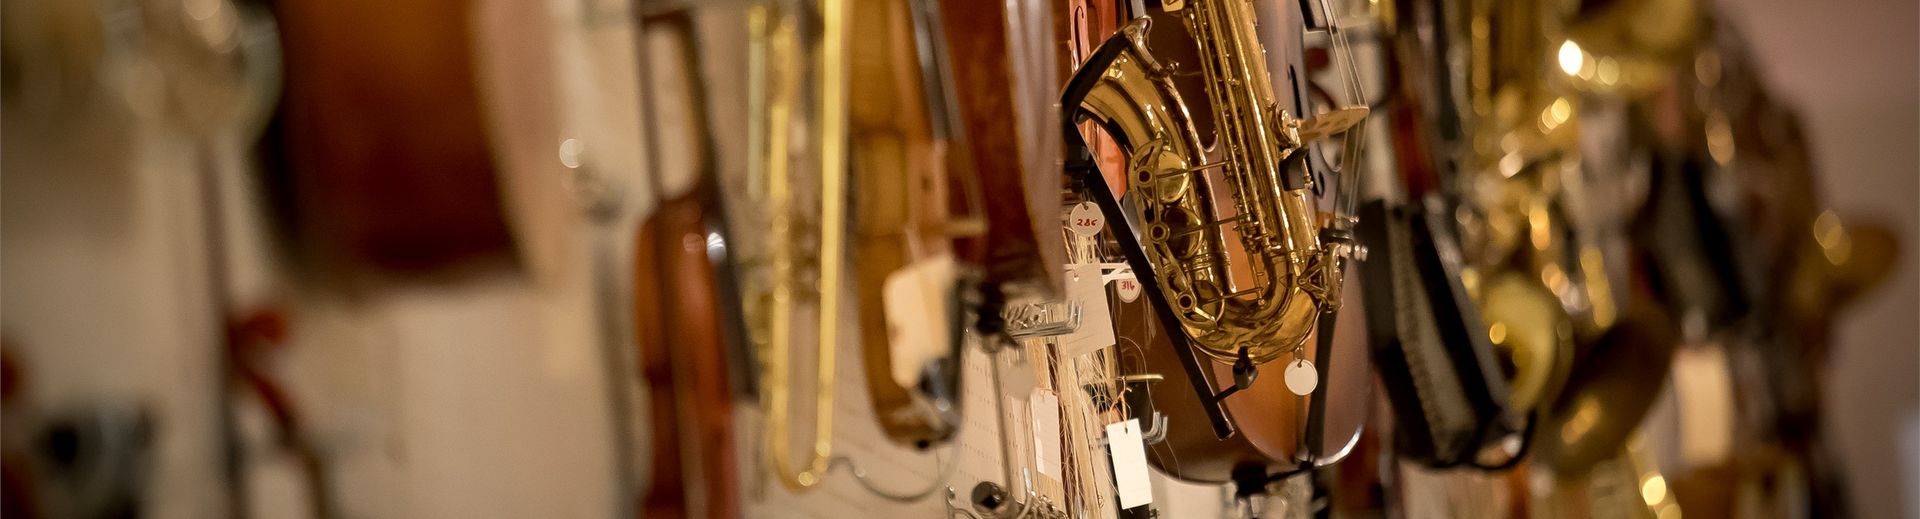 Several string and brass instruments hanging on a wall.